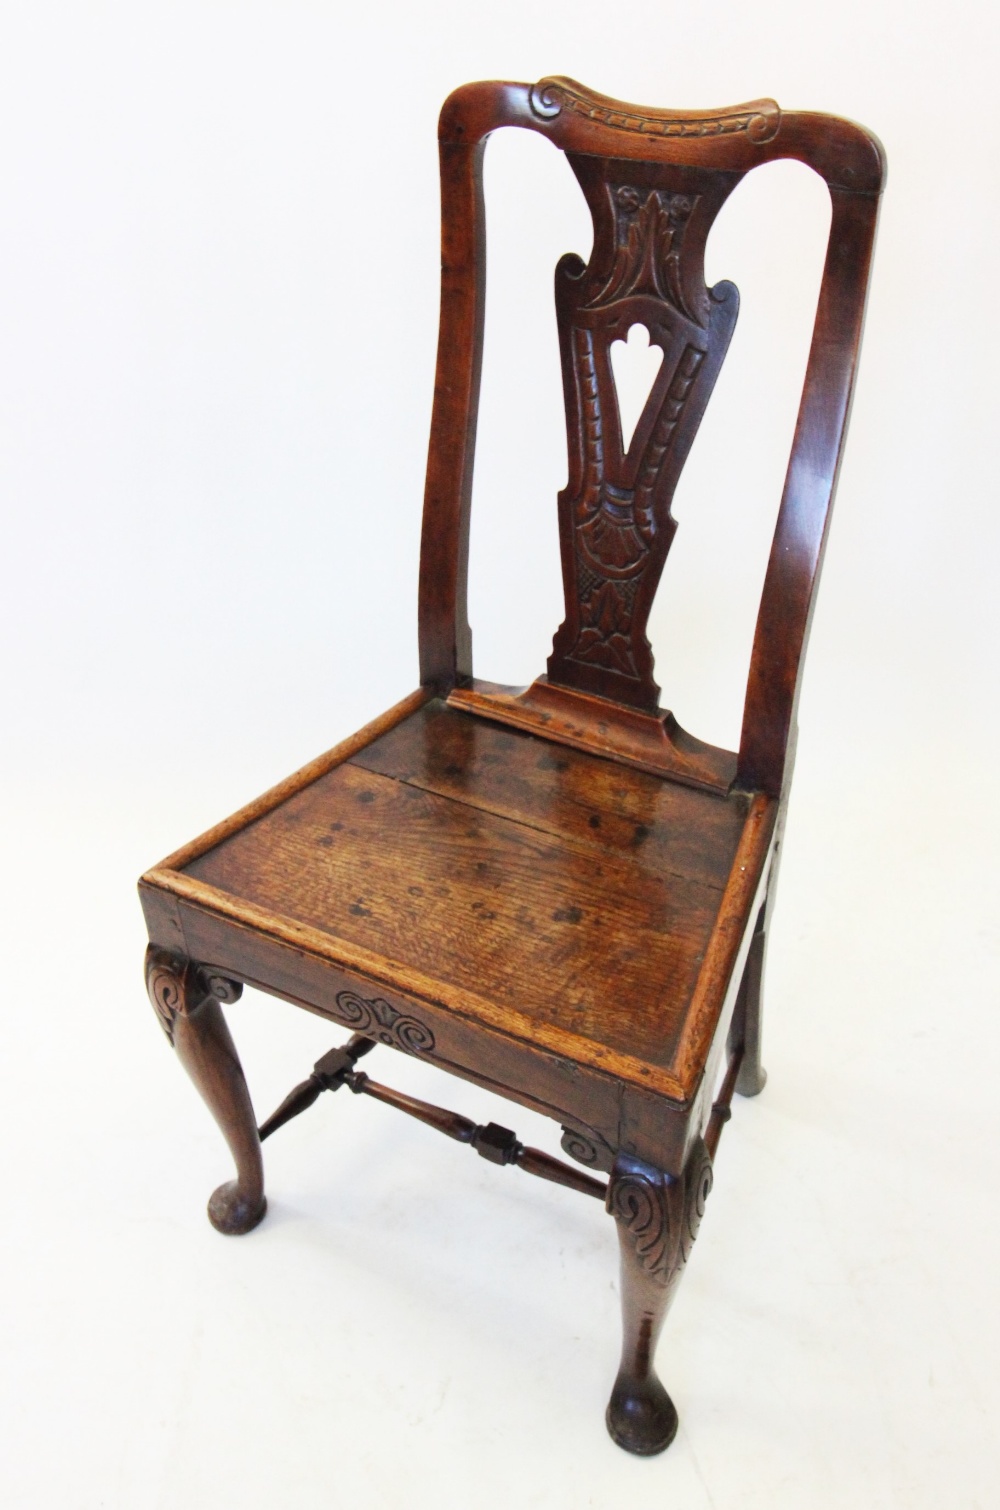 A late 17th century oak side chair, with a pierced and carved vase shaped splat above a board seat